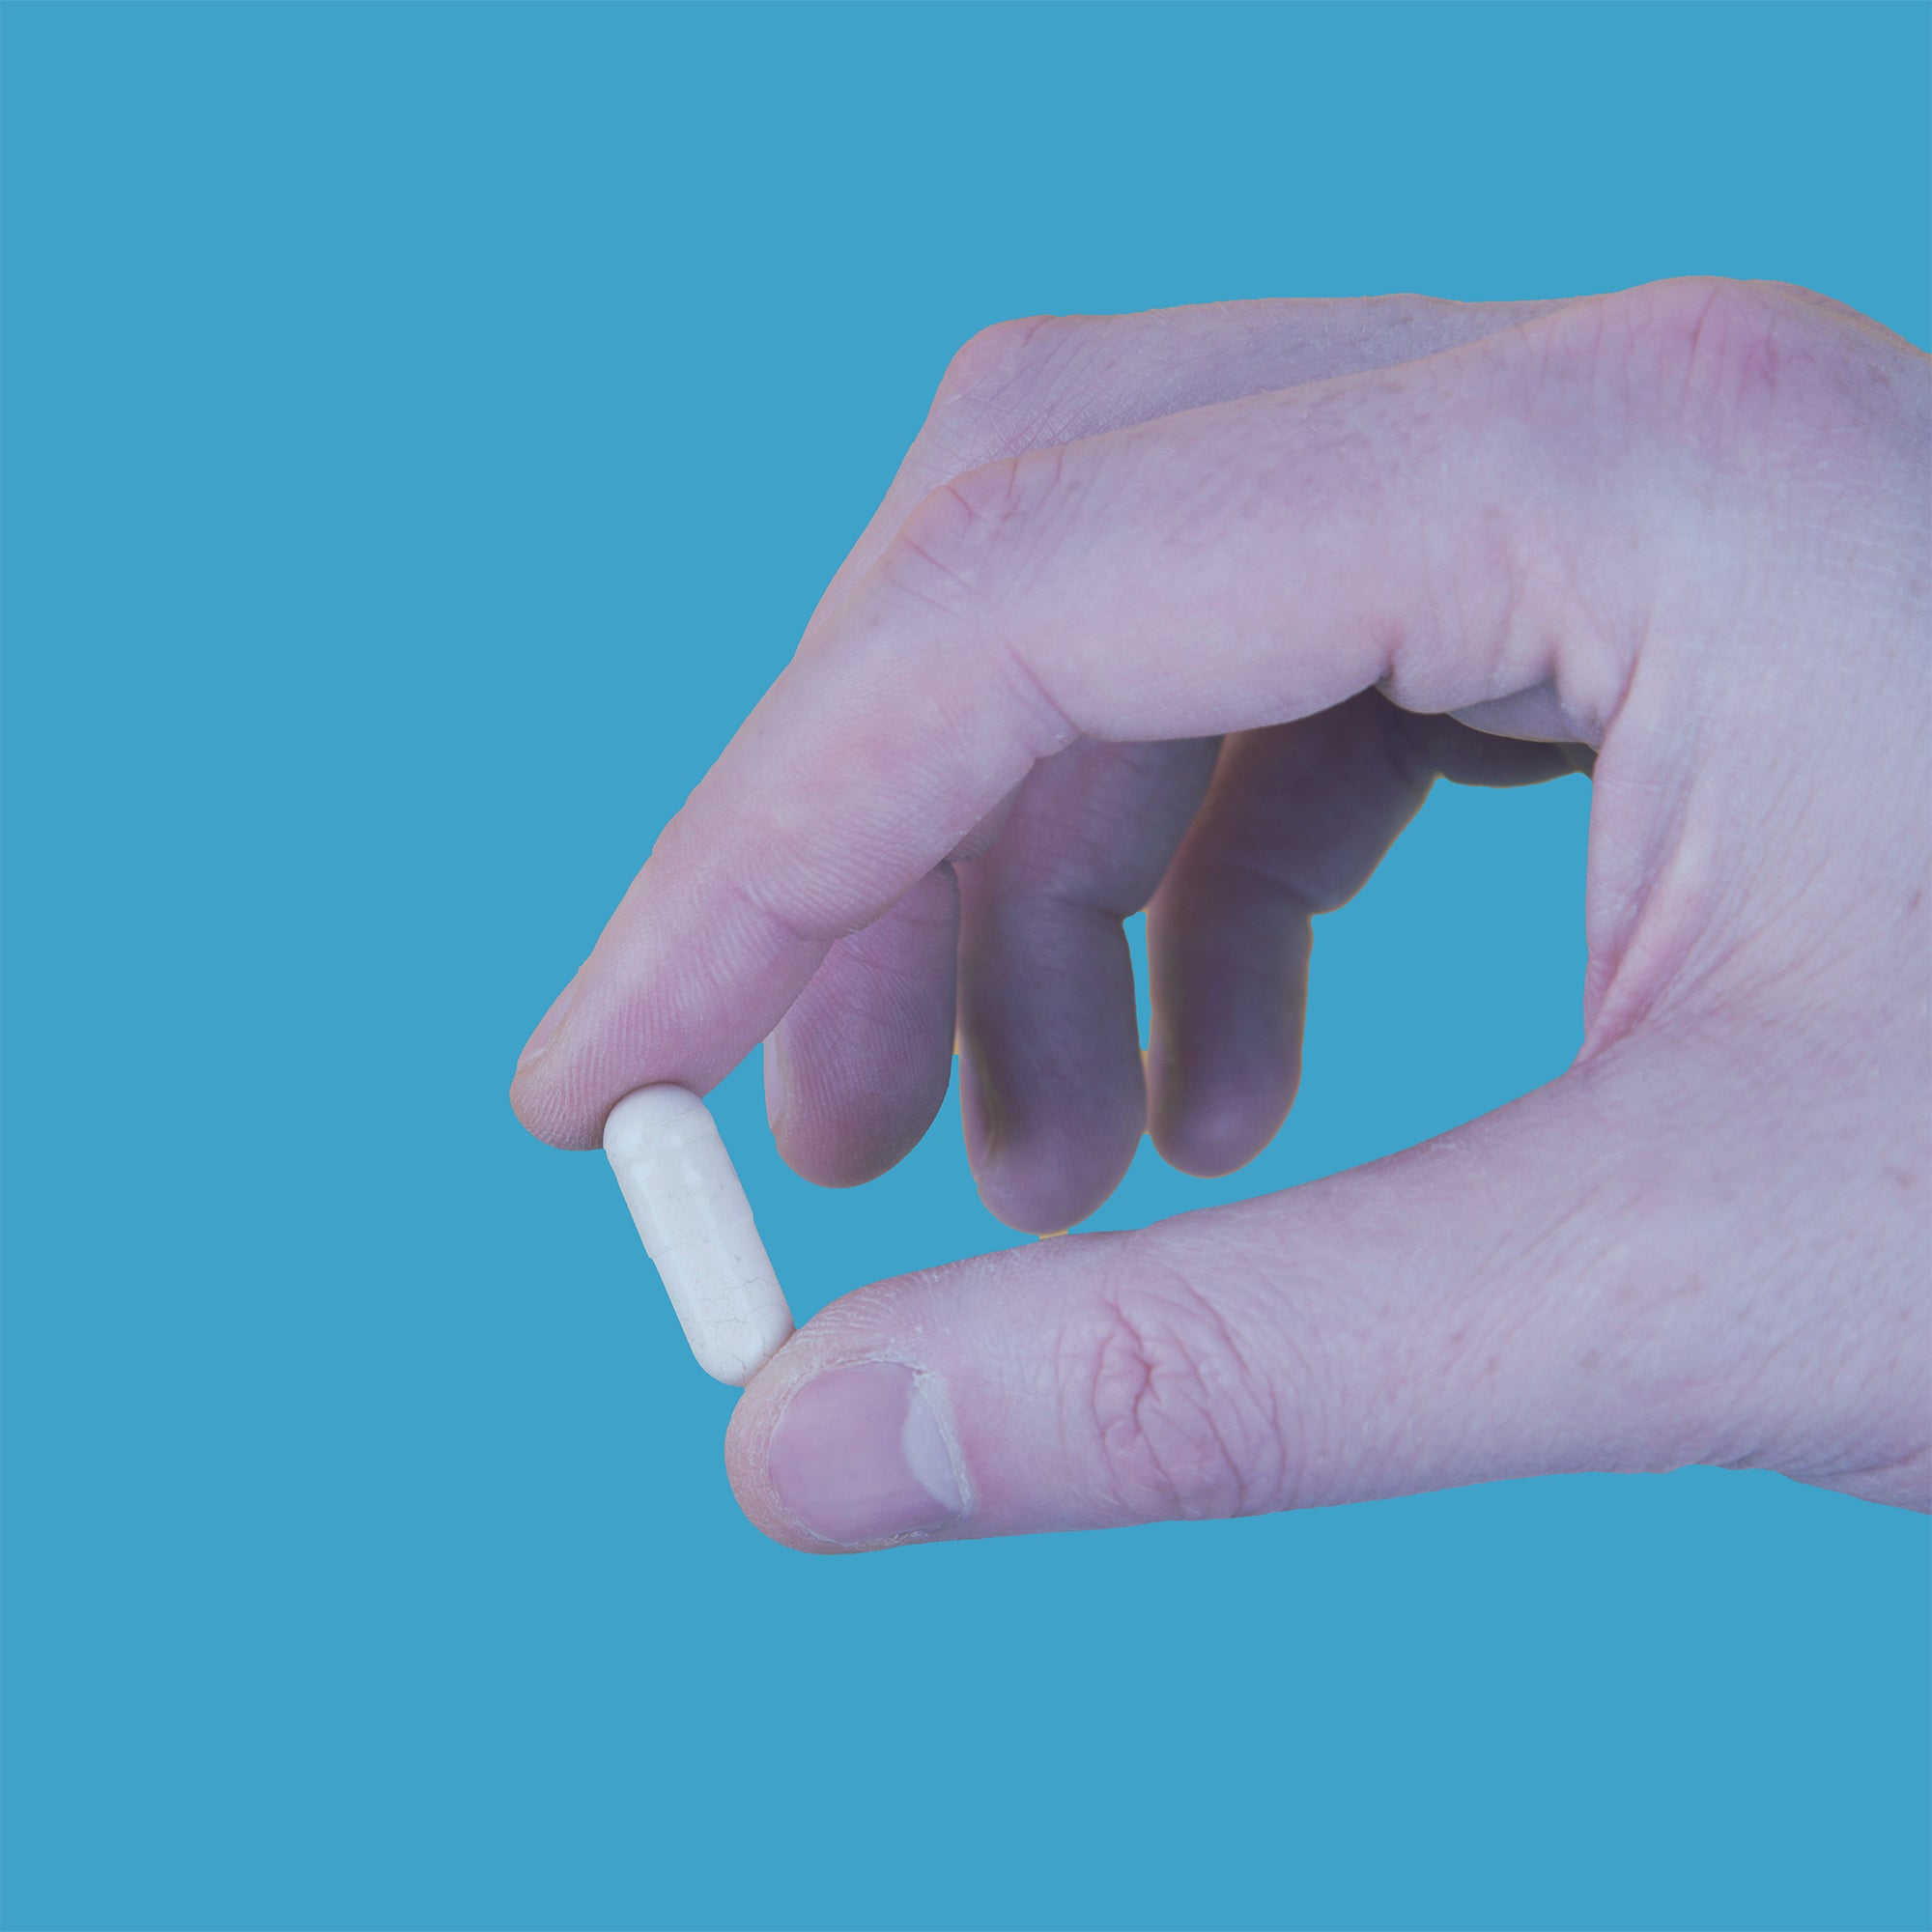 Person's hand holding a single pill of medication or a vitamin